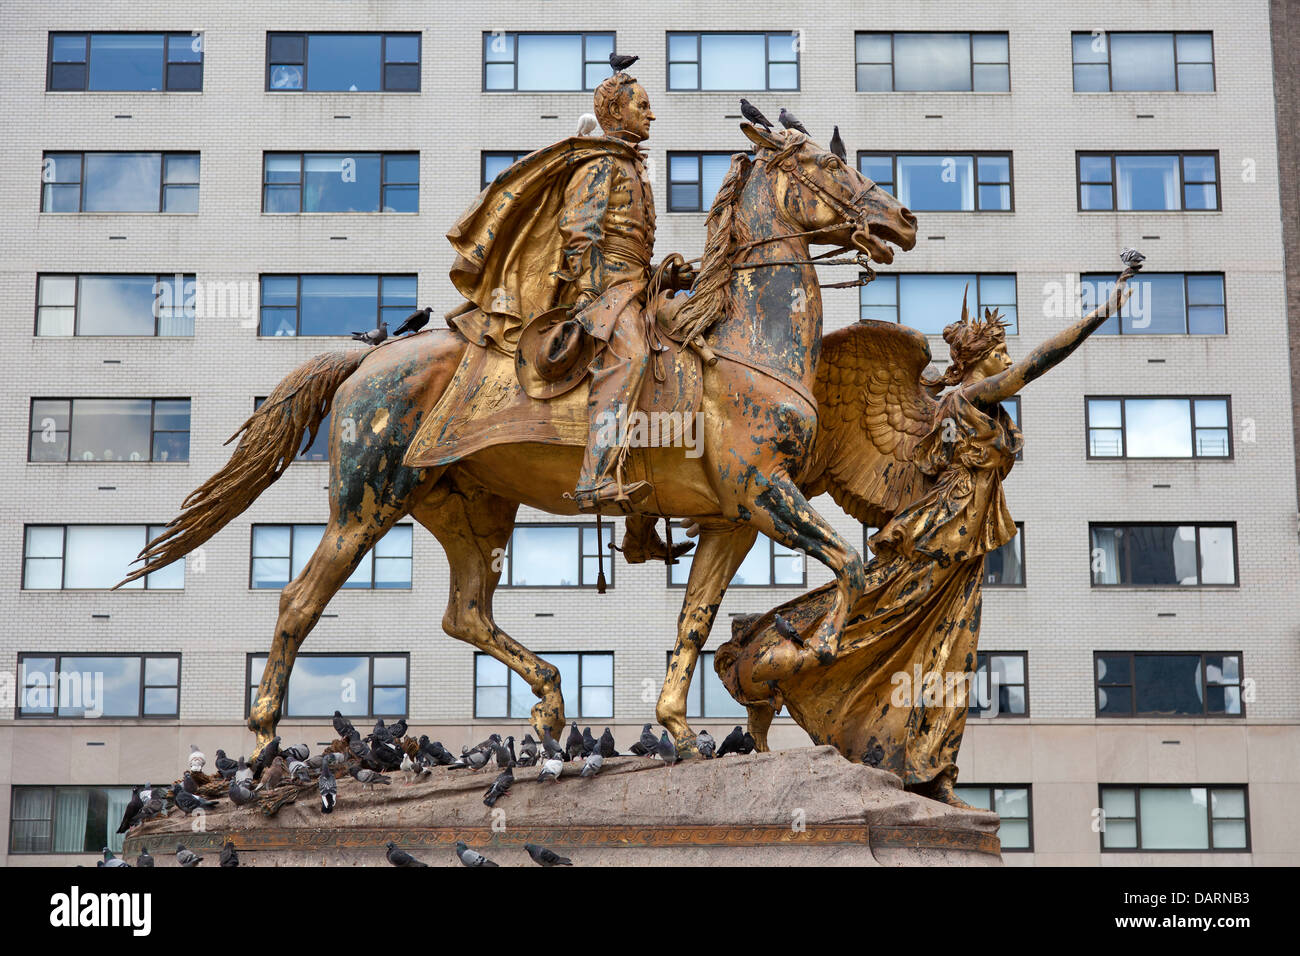 General Sherman Monument, 1903, equestrian statue, Grand Army Plaza, Central Park South, Manhattan, New York City, New York, USA Stock Photo